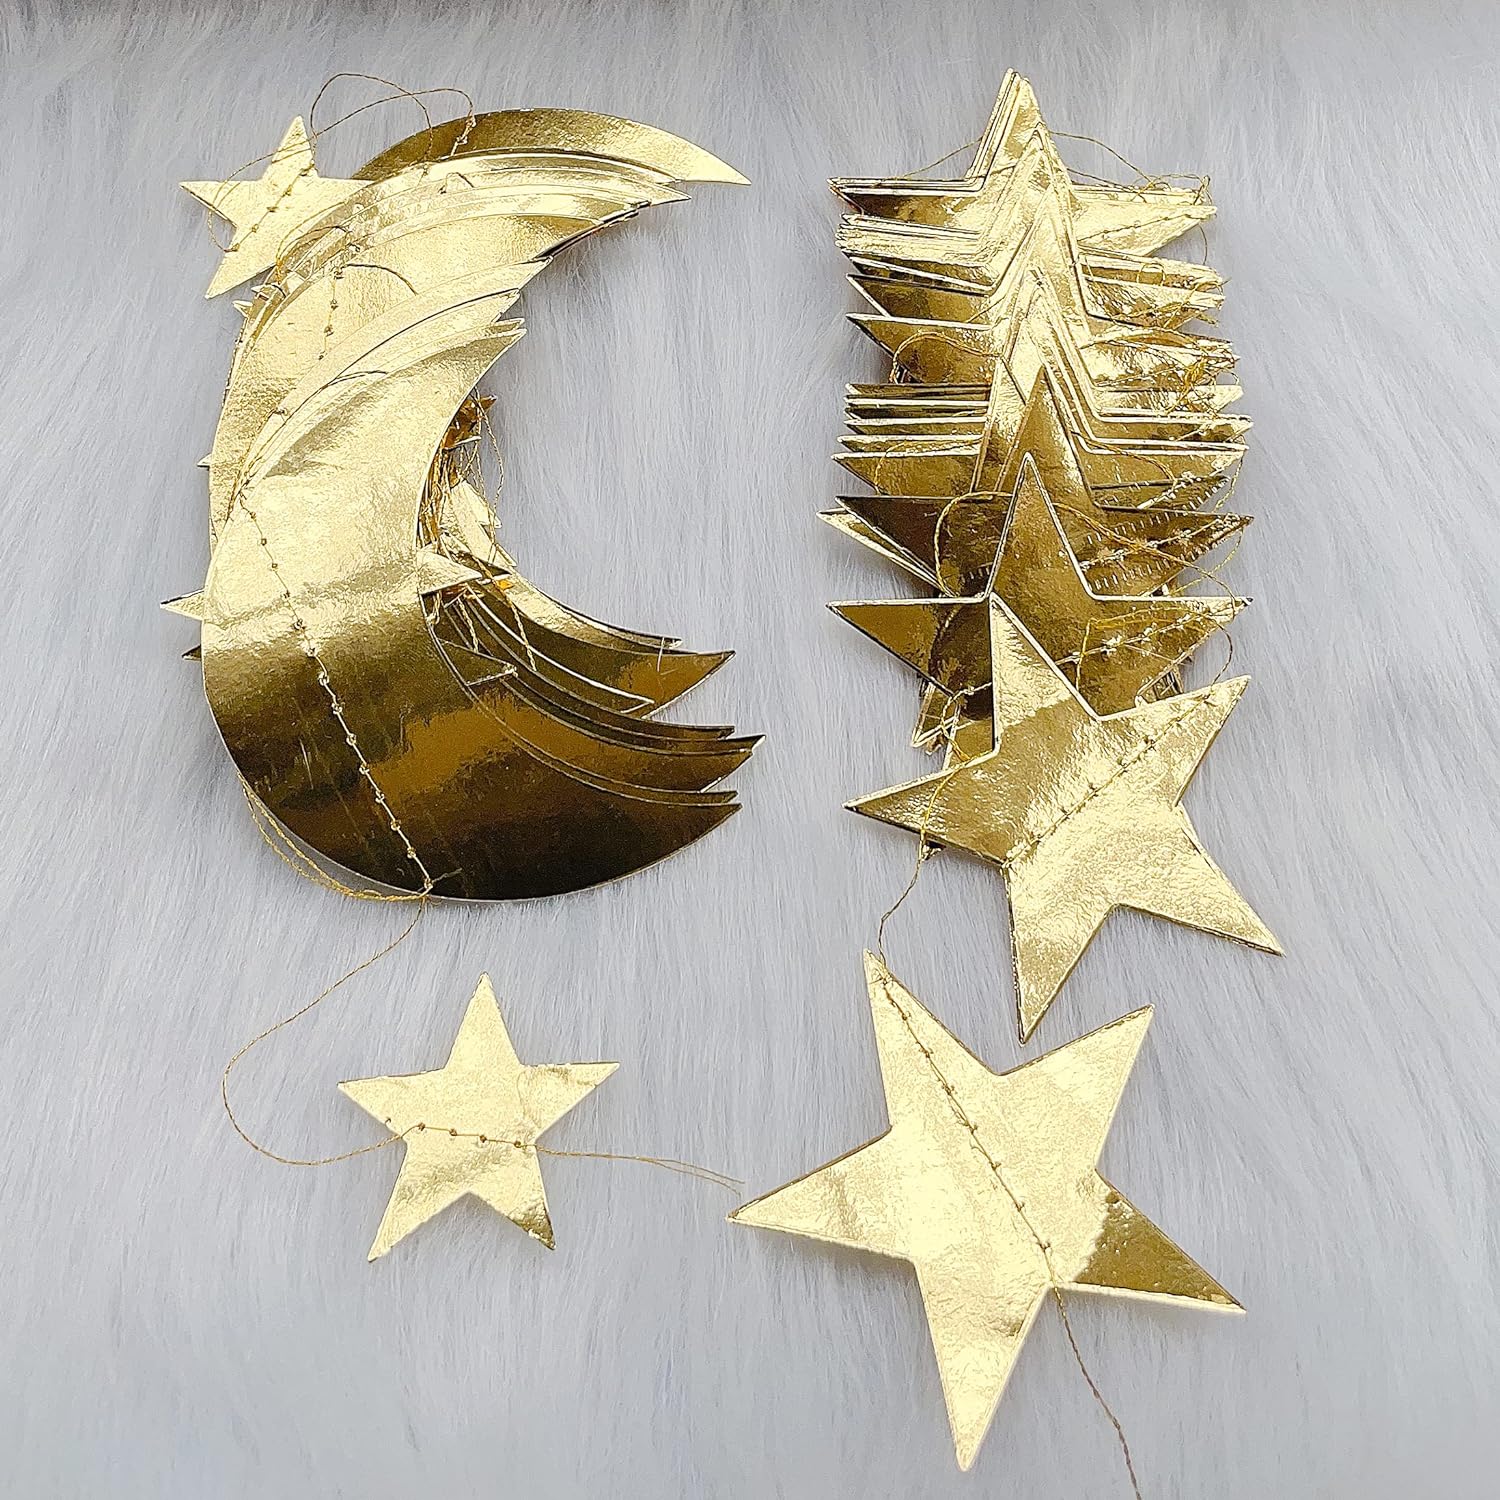 52ft Gold Moon and Star Garland HADEEONG 4Pcs Star Garlands Moon Streamers Reflective Glitter Paper Hanging Garland for Gold Birthday Party Decorations